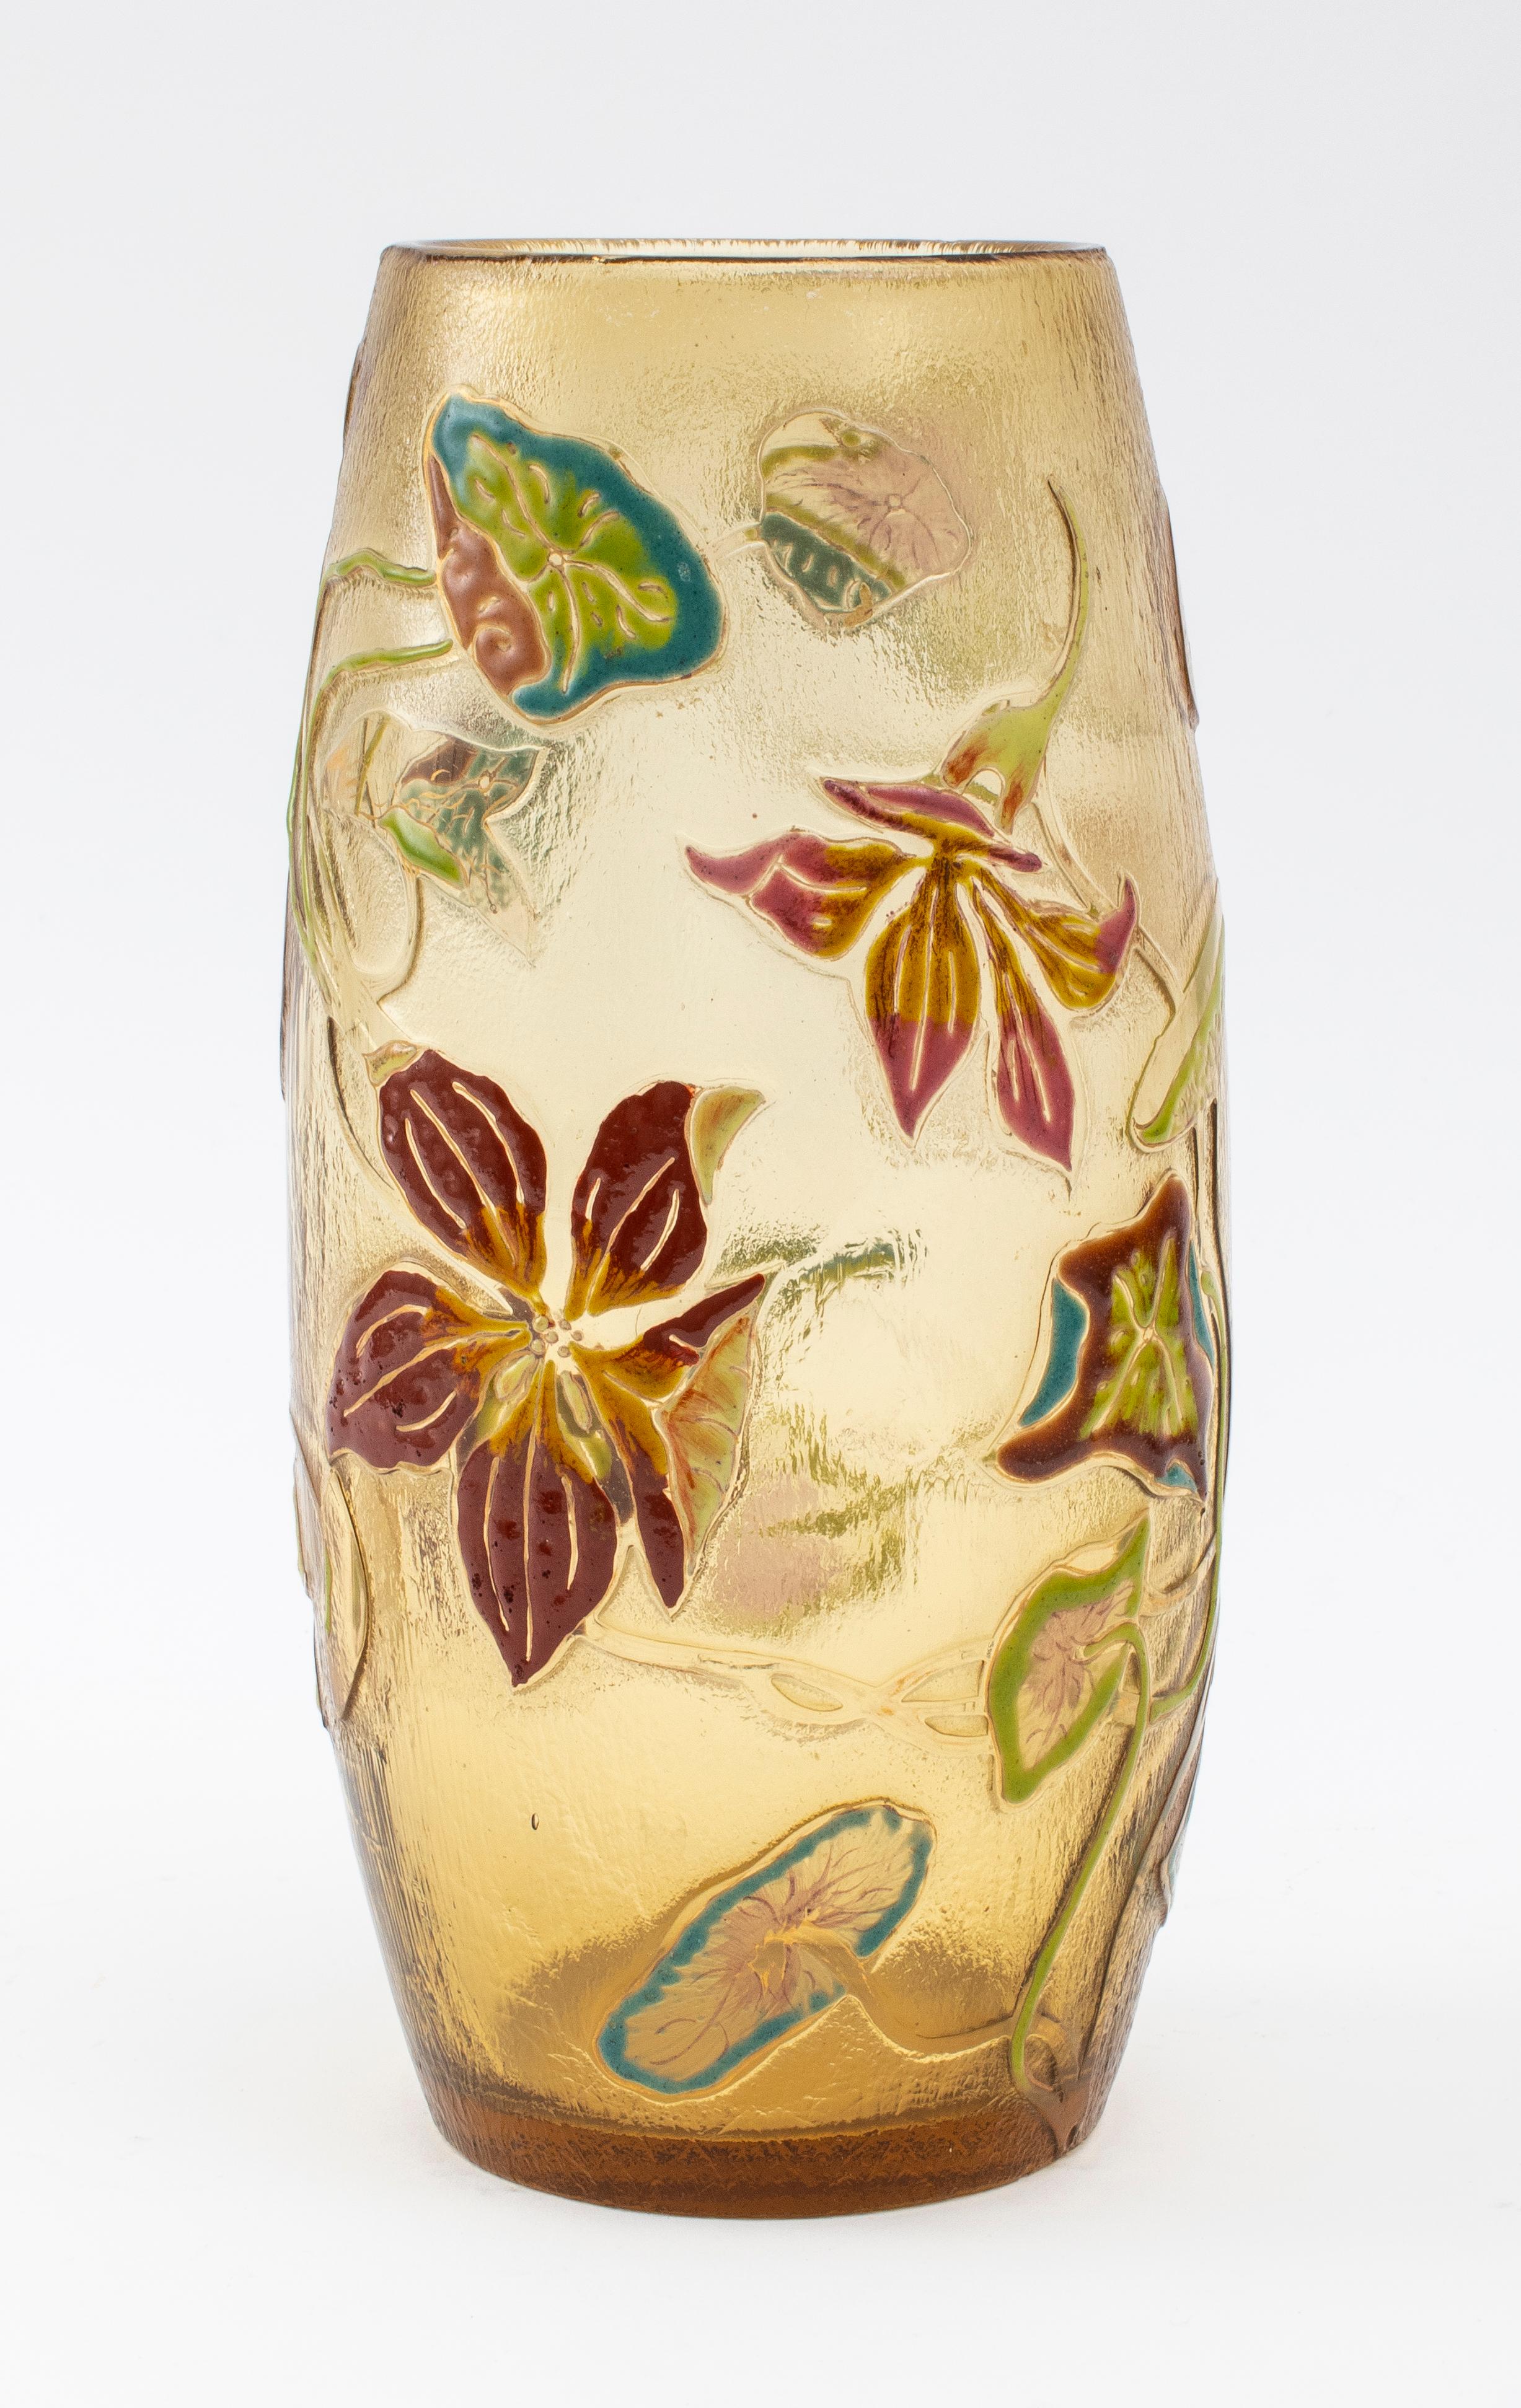 Galle amber enameled art glass vase with floral motif, of ovoid form, and with a textured and polished surface, enameled poppies, irises, and leafy stalks vining around the cylindrical form in green, blue, violet, pink, brown, and gold tones are